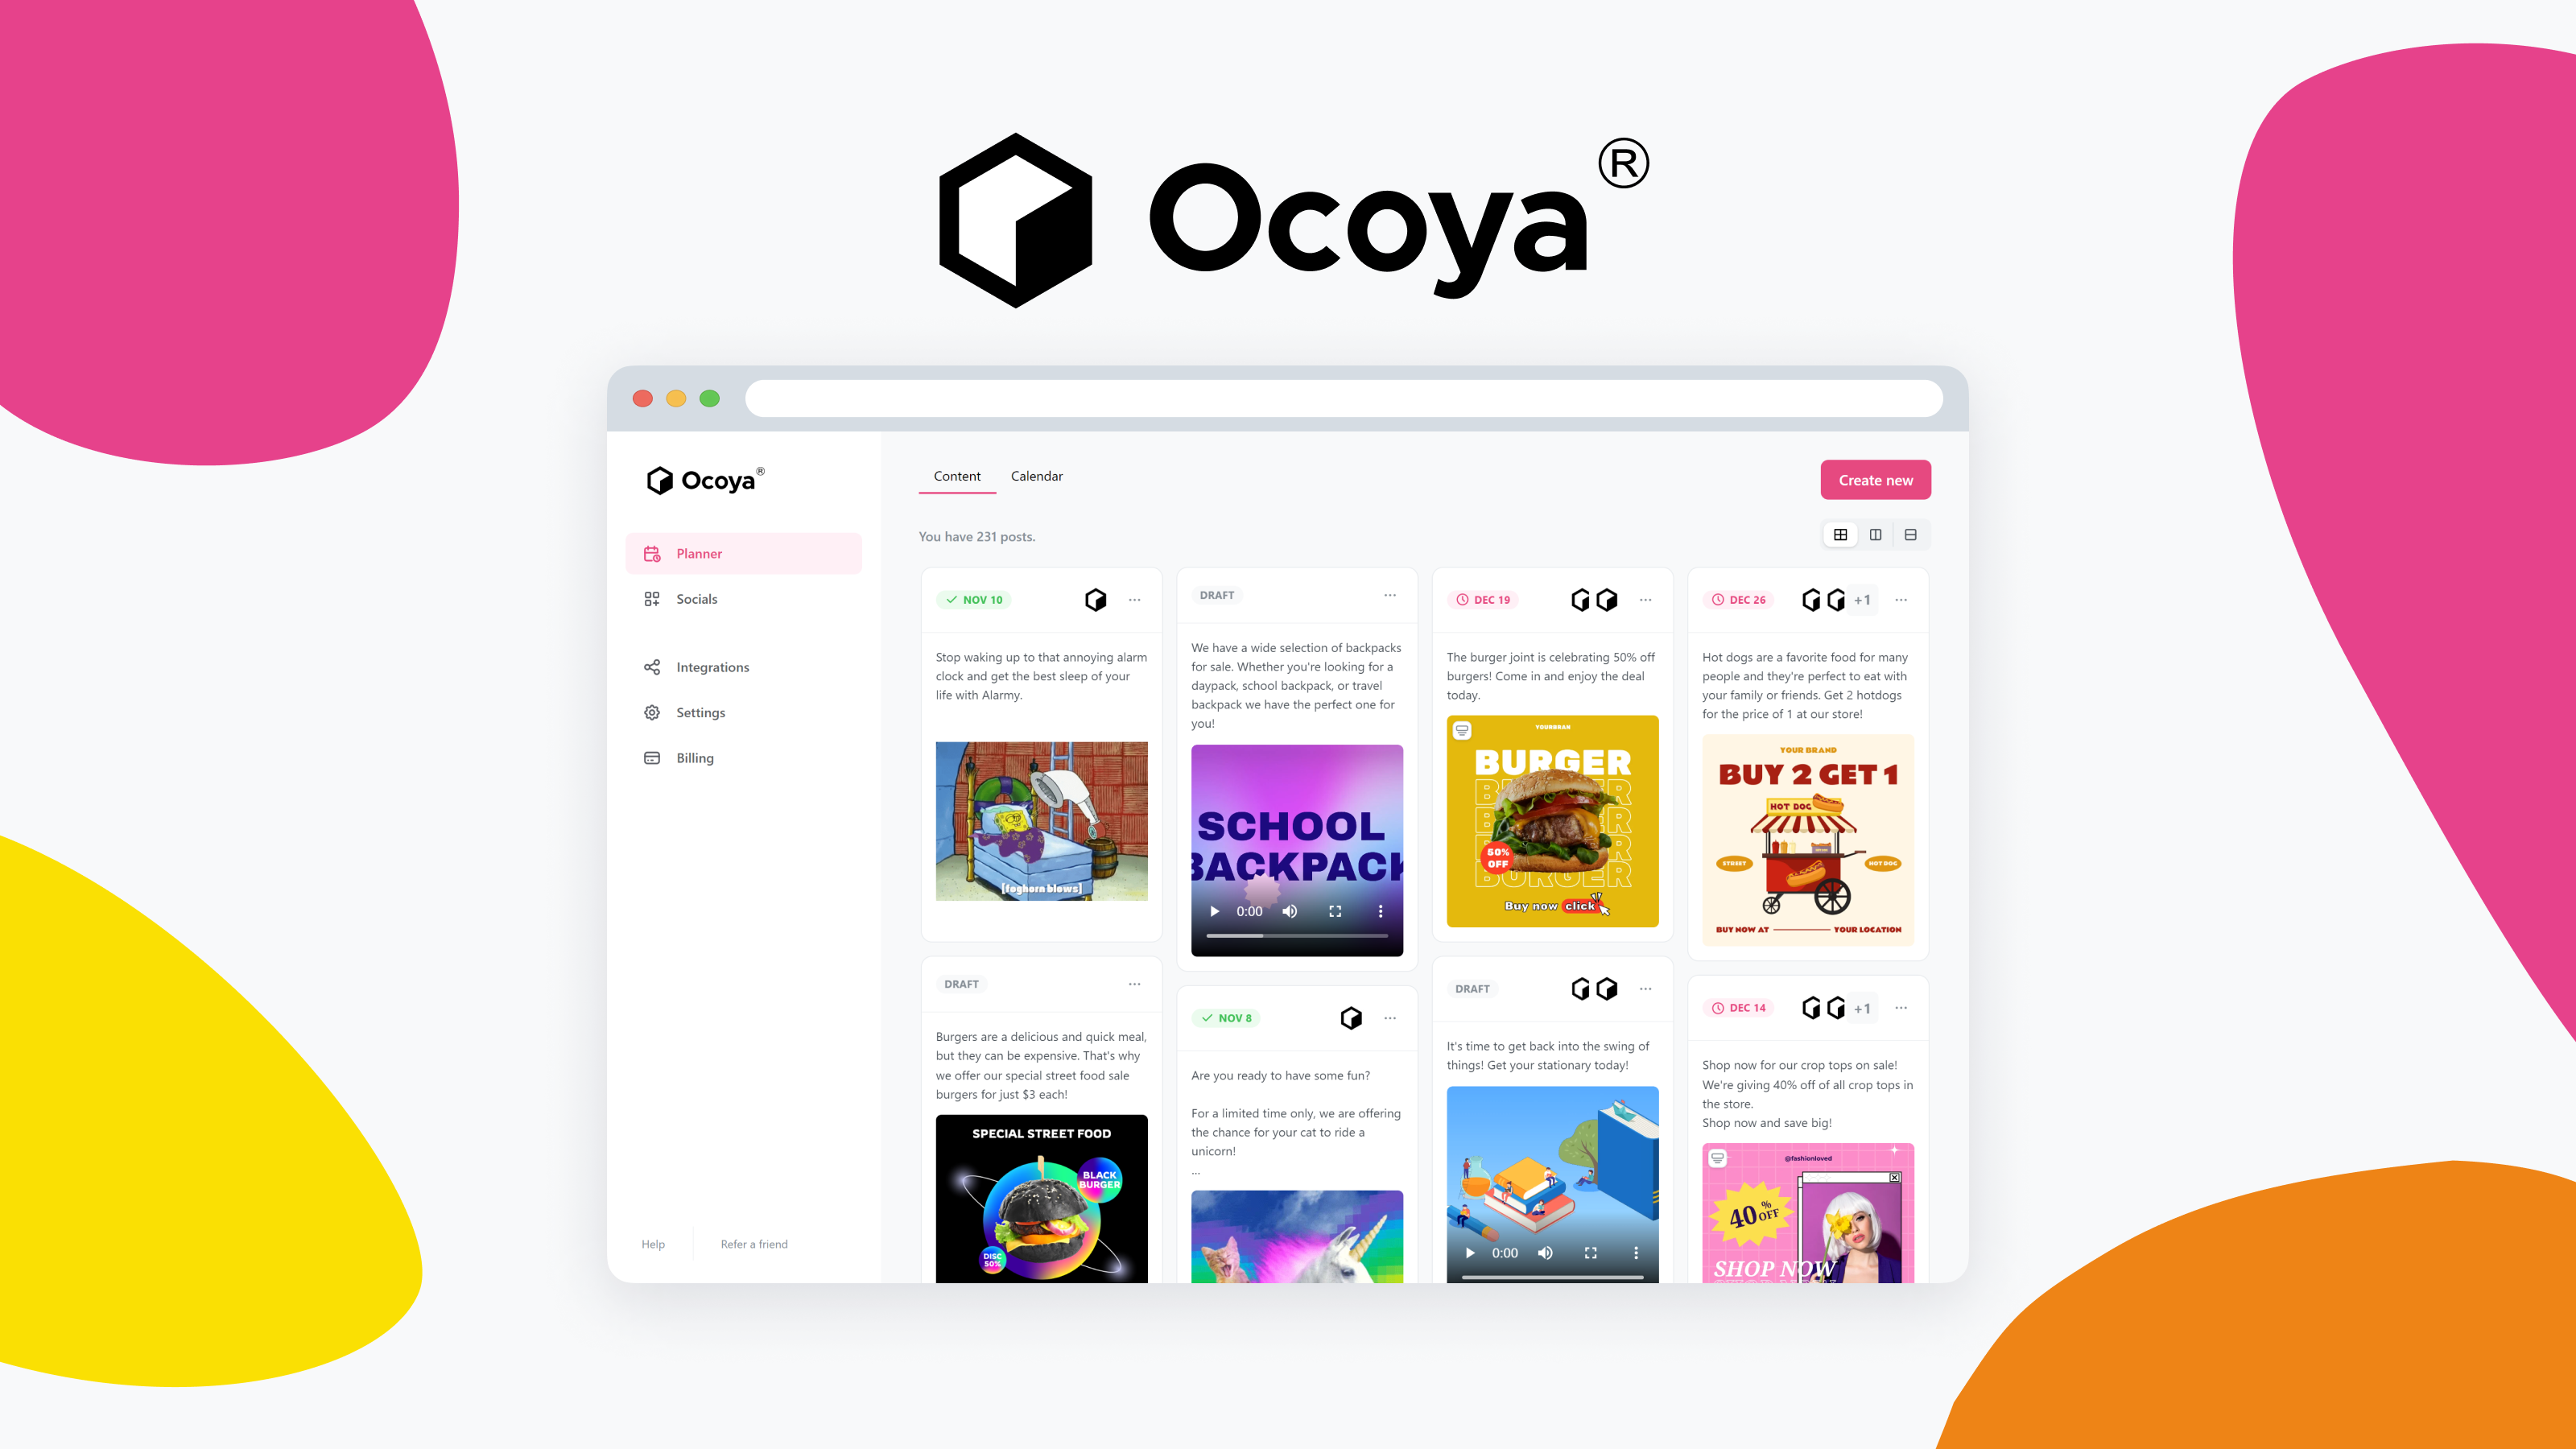 Ocoya - A suite of tools for social media content creation and management